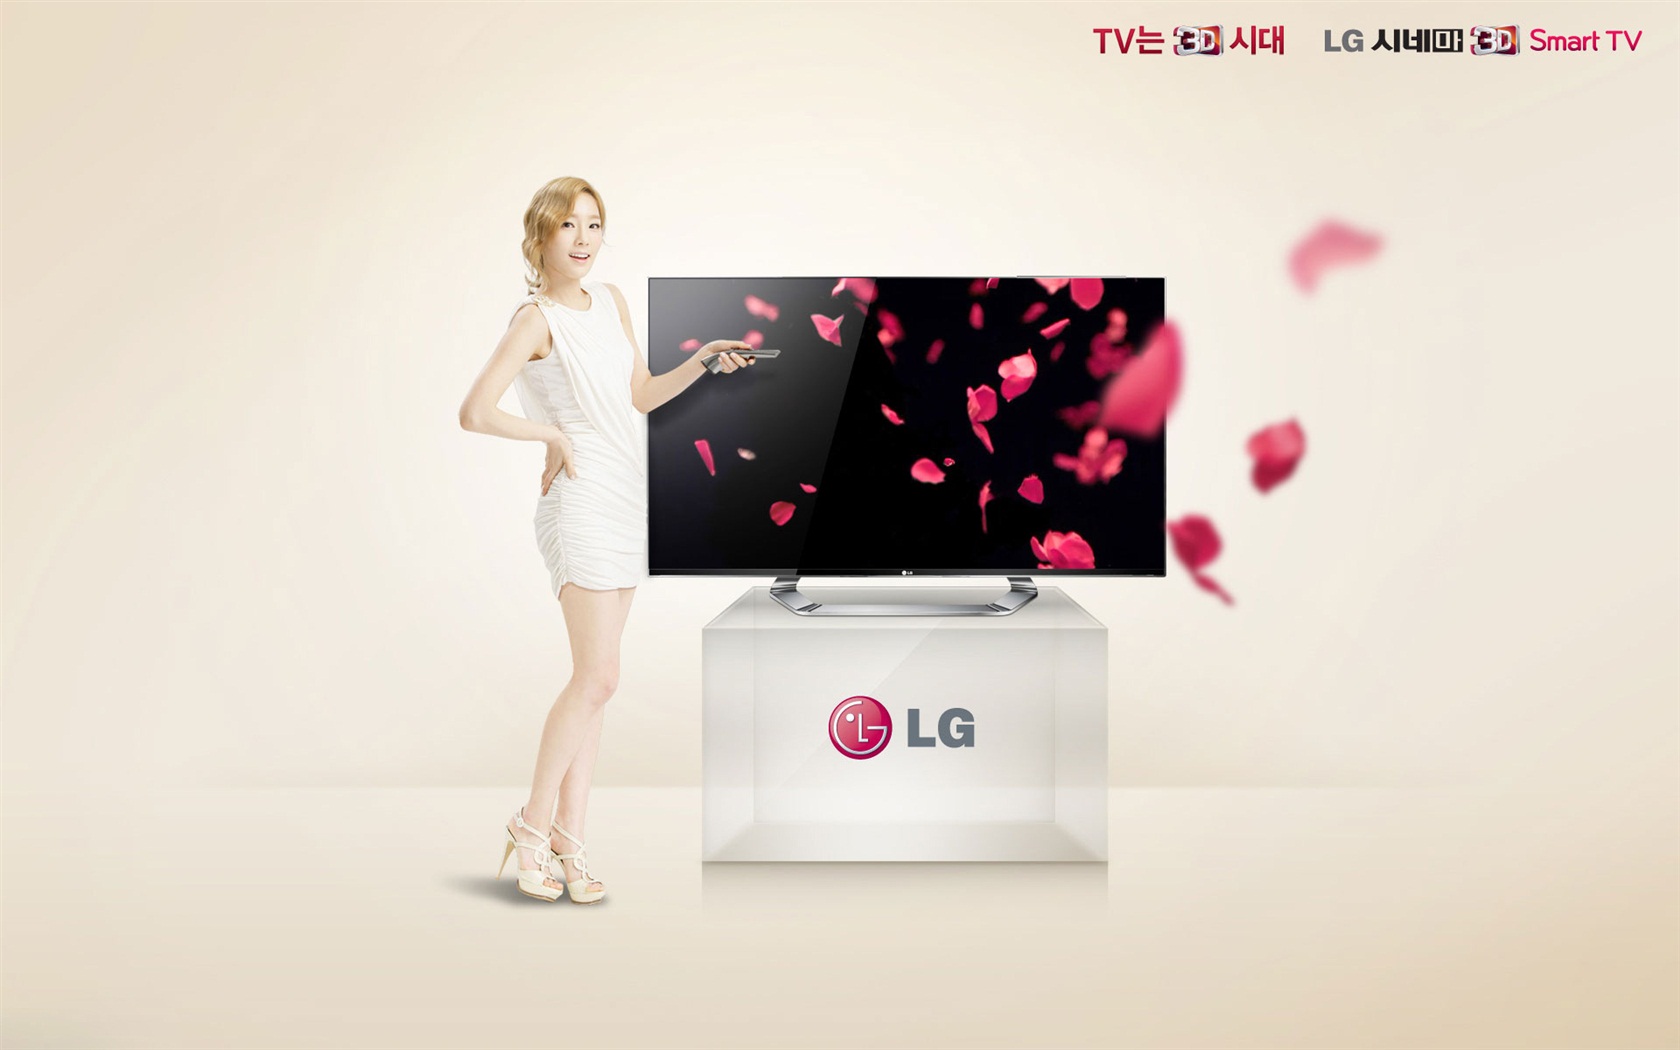 Girls Generation ACE and LG endorsements ads HD wallpapers #14 - 1680x1050